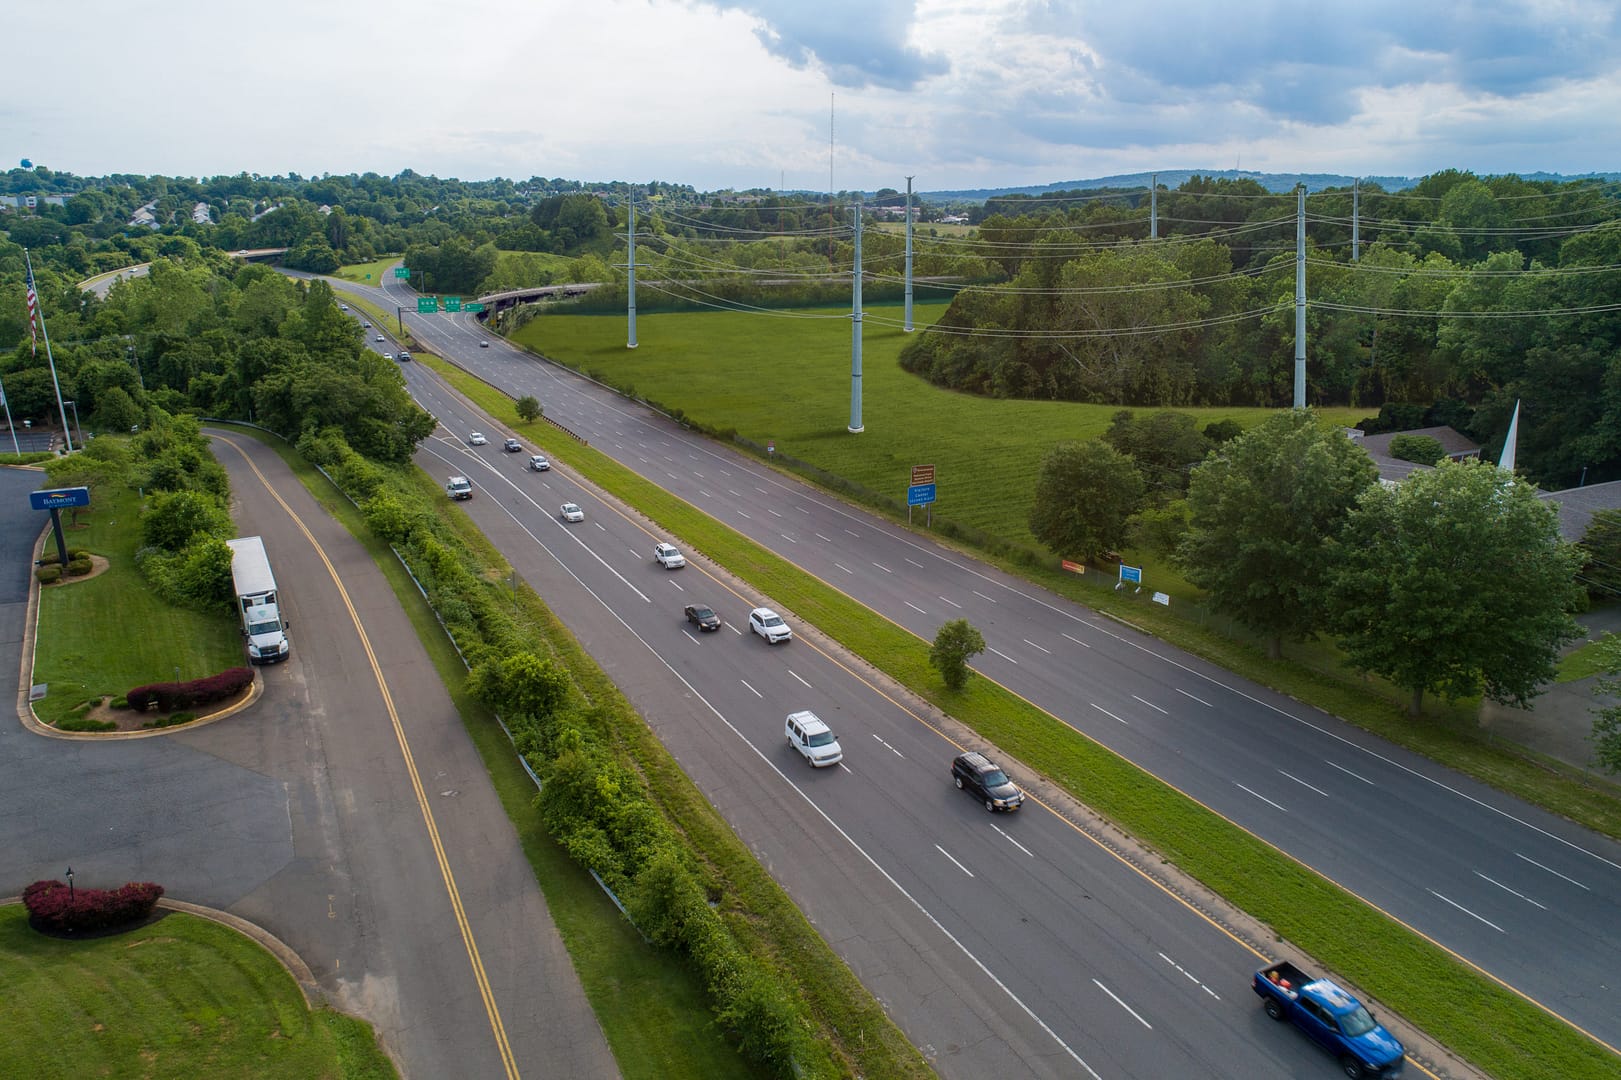 aerial image of a highway with power line towers running alongside